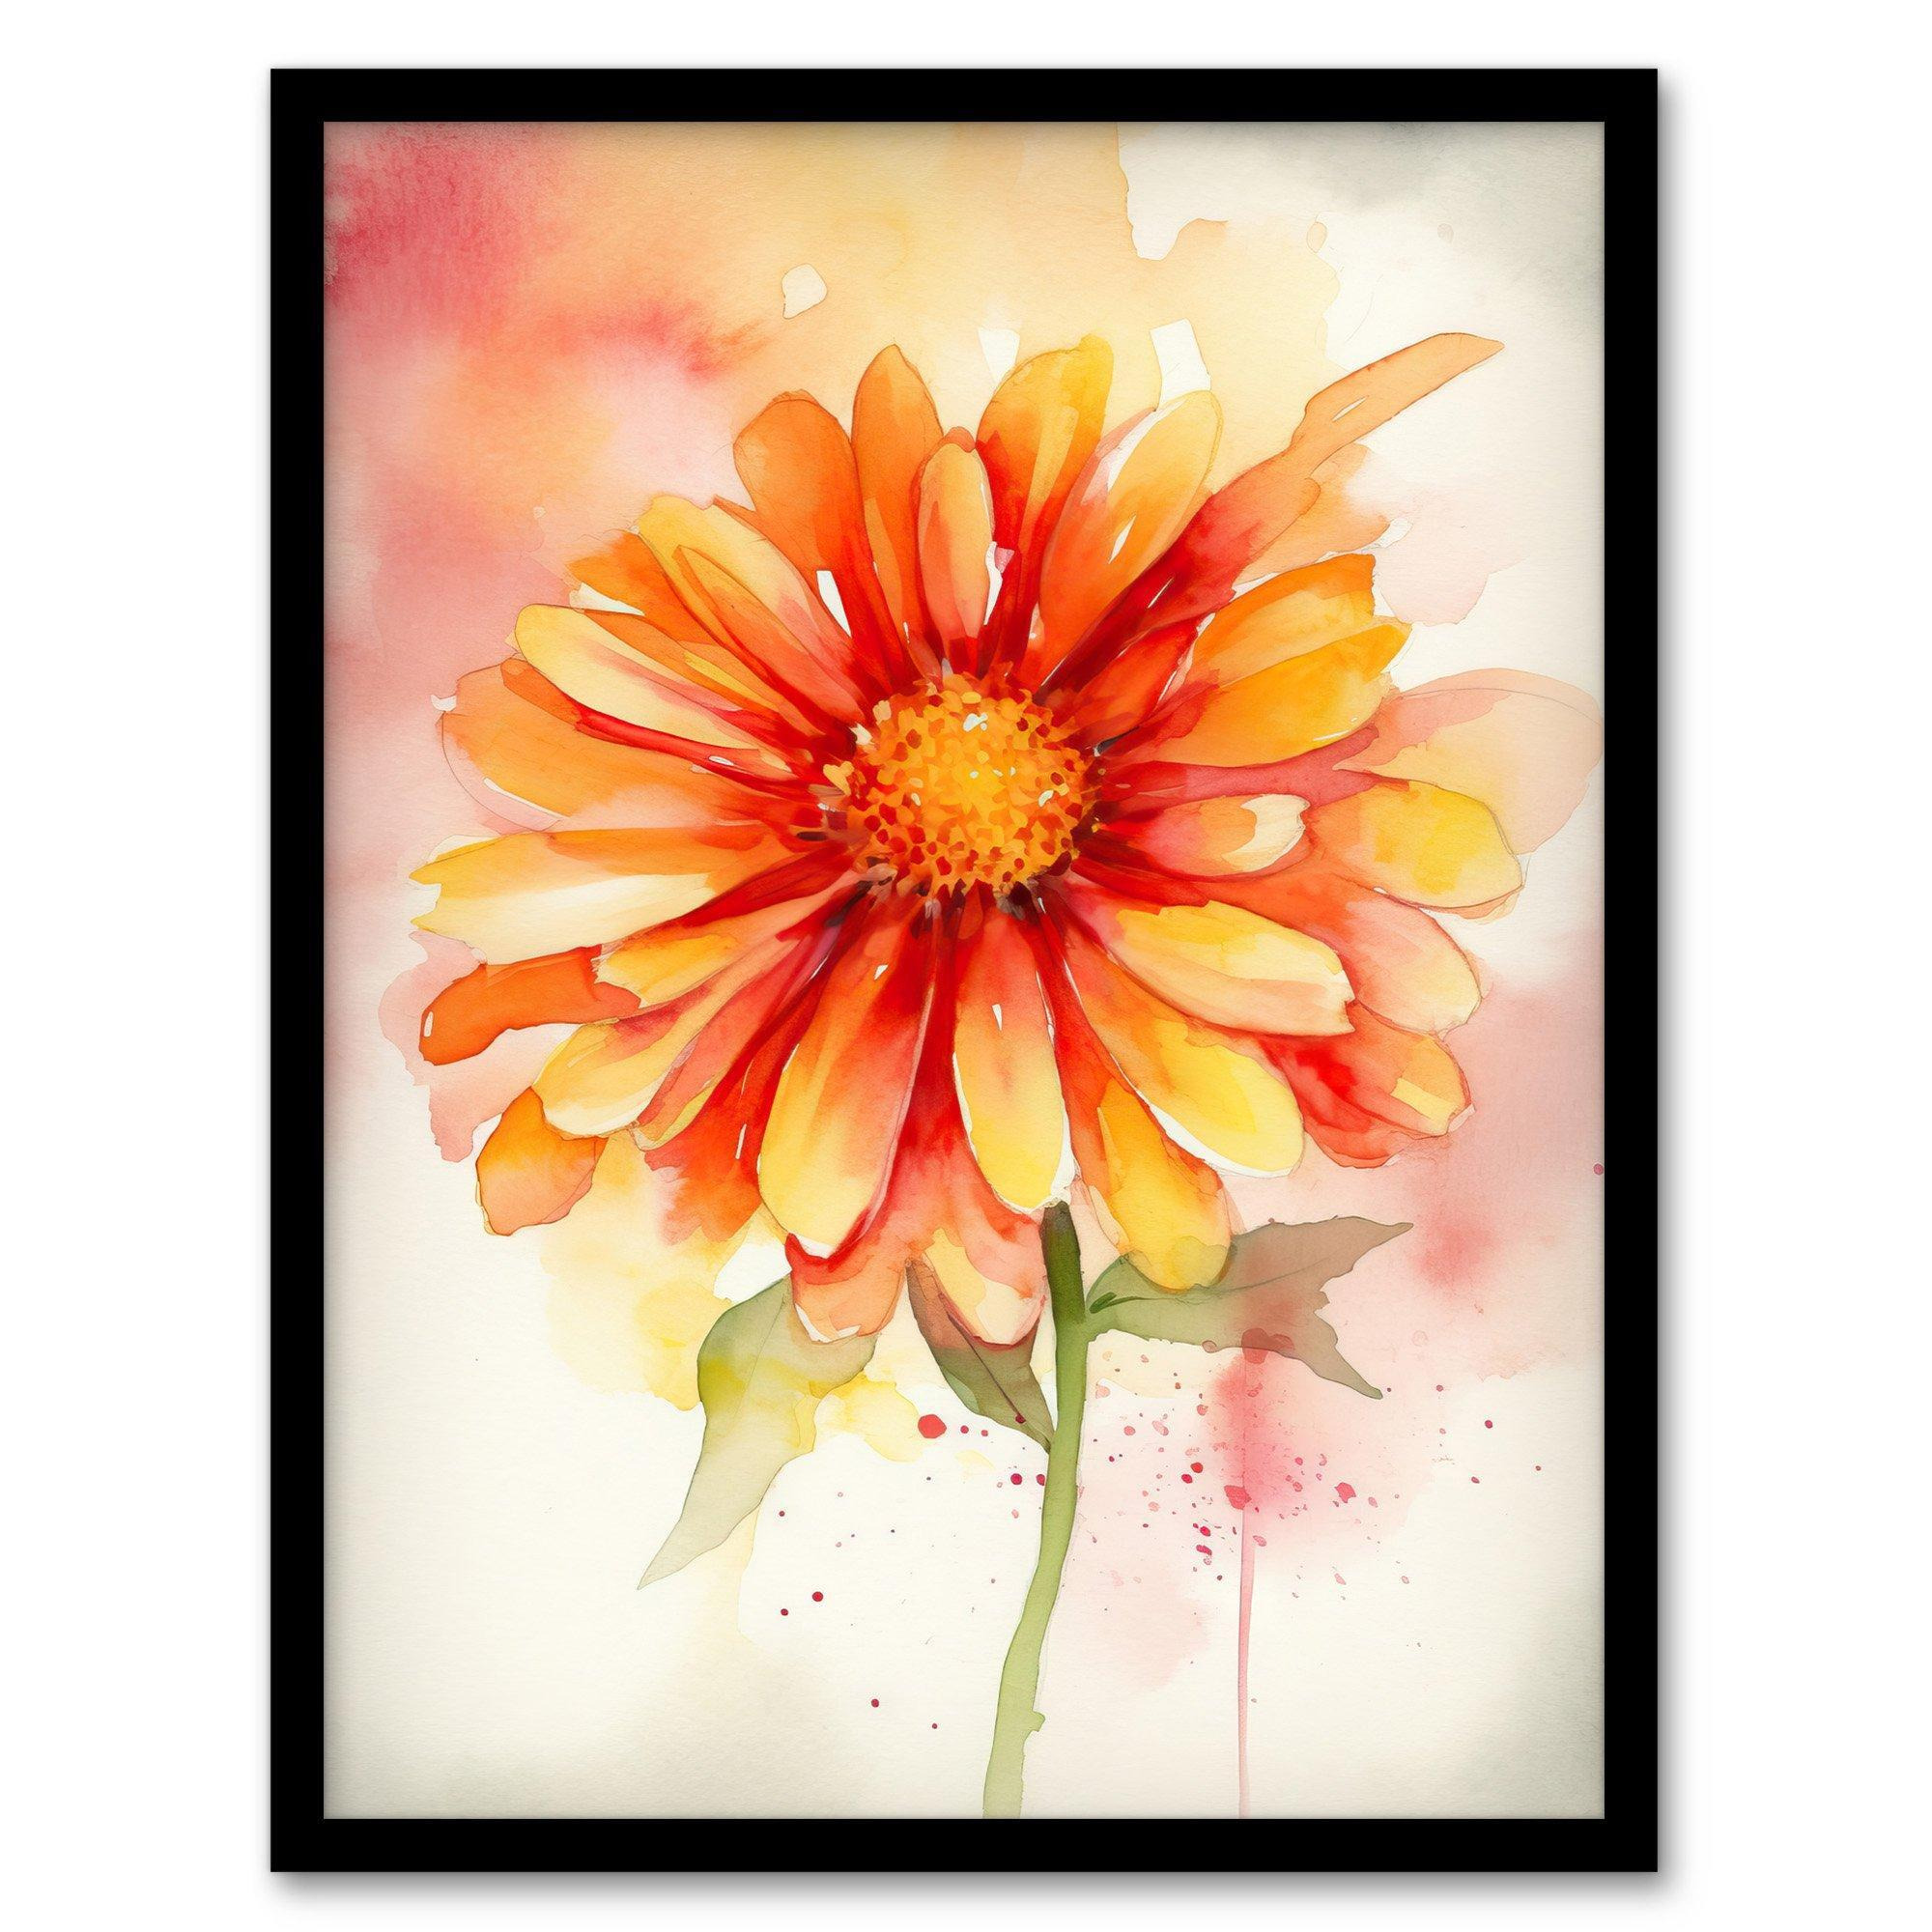 A Single Gerbera Daisy Soft Watercolour Painting Pink Green Orange Spring Bloom Flower Nature Colourful Bright Floral Modern Artwork Art Print Framed Poster Wall Decor - image 1